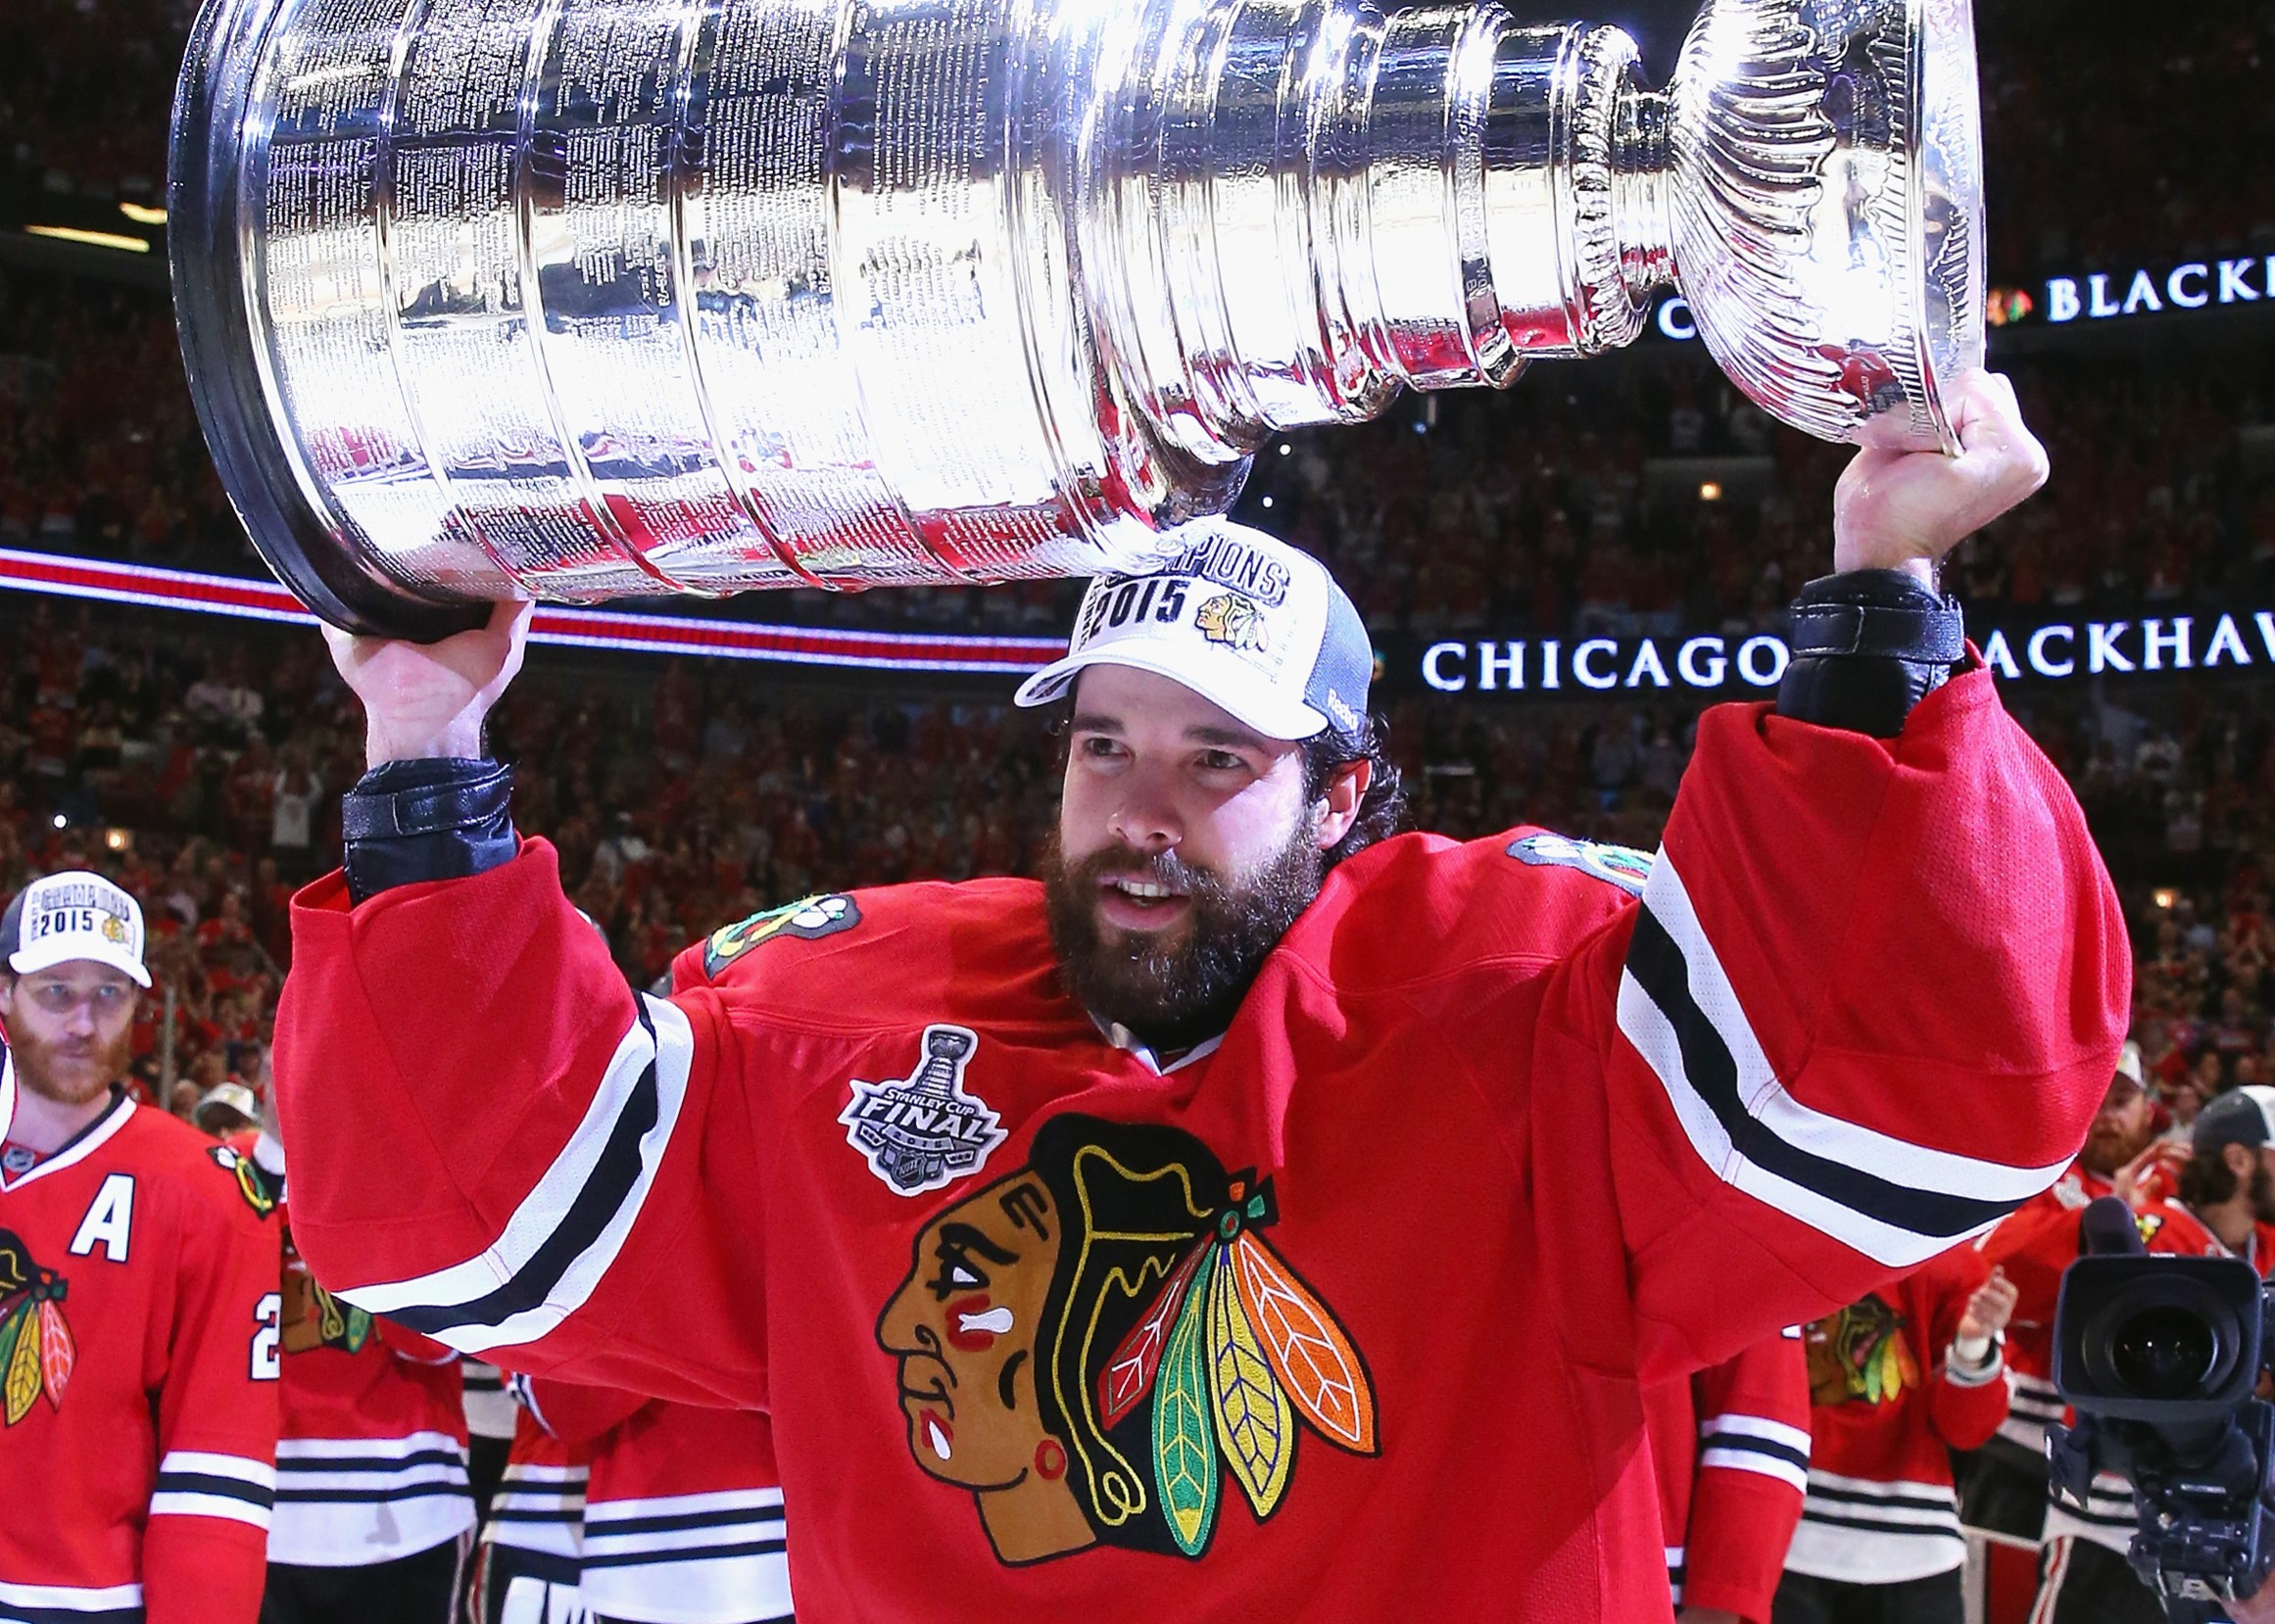 The time is right for the Blackhawks to retire Steve Larmer's No. 28